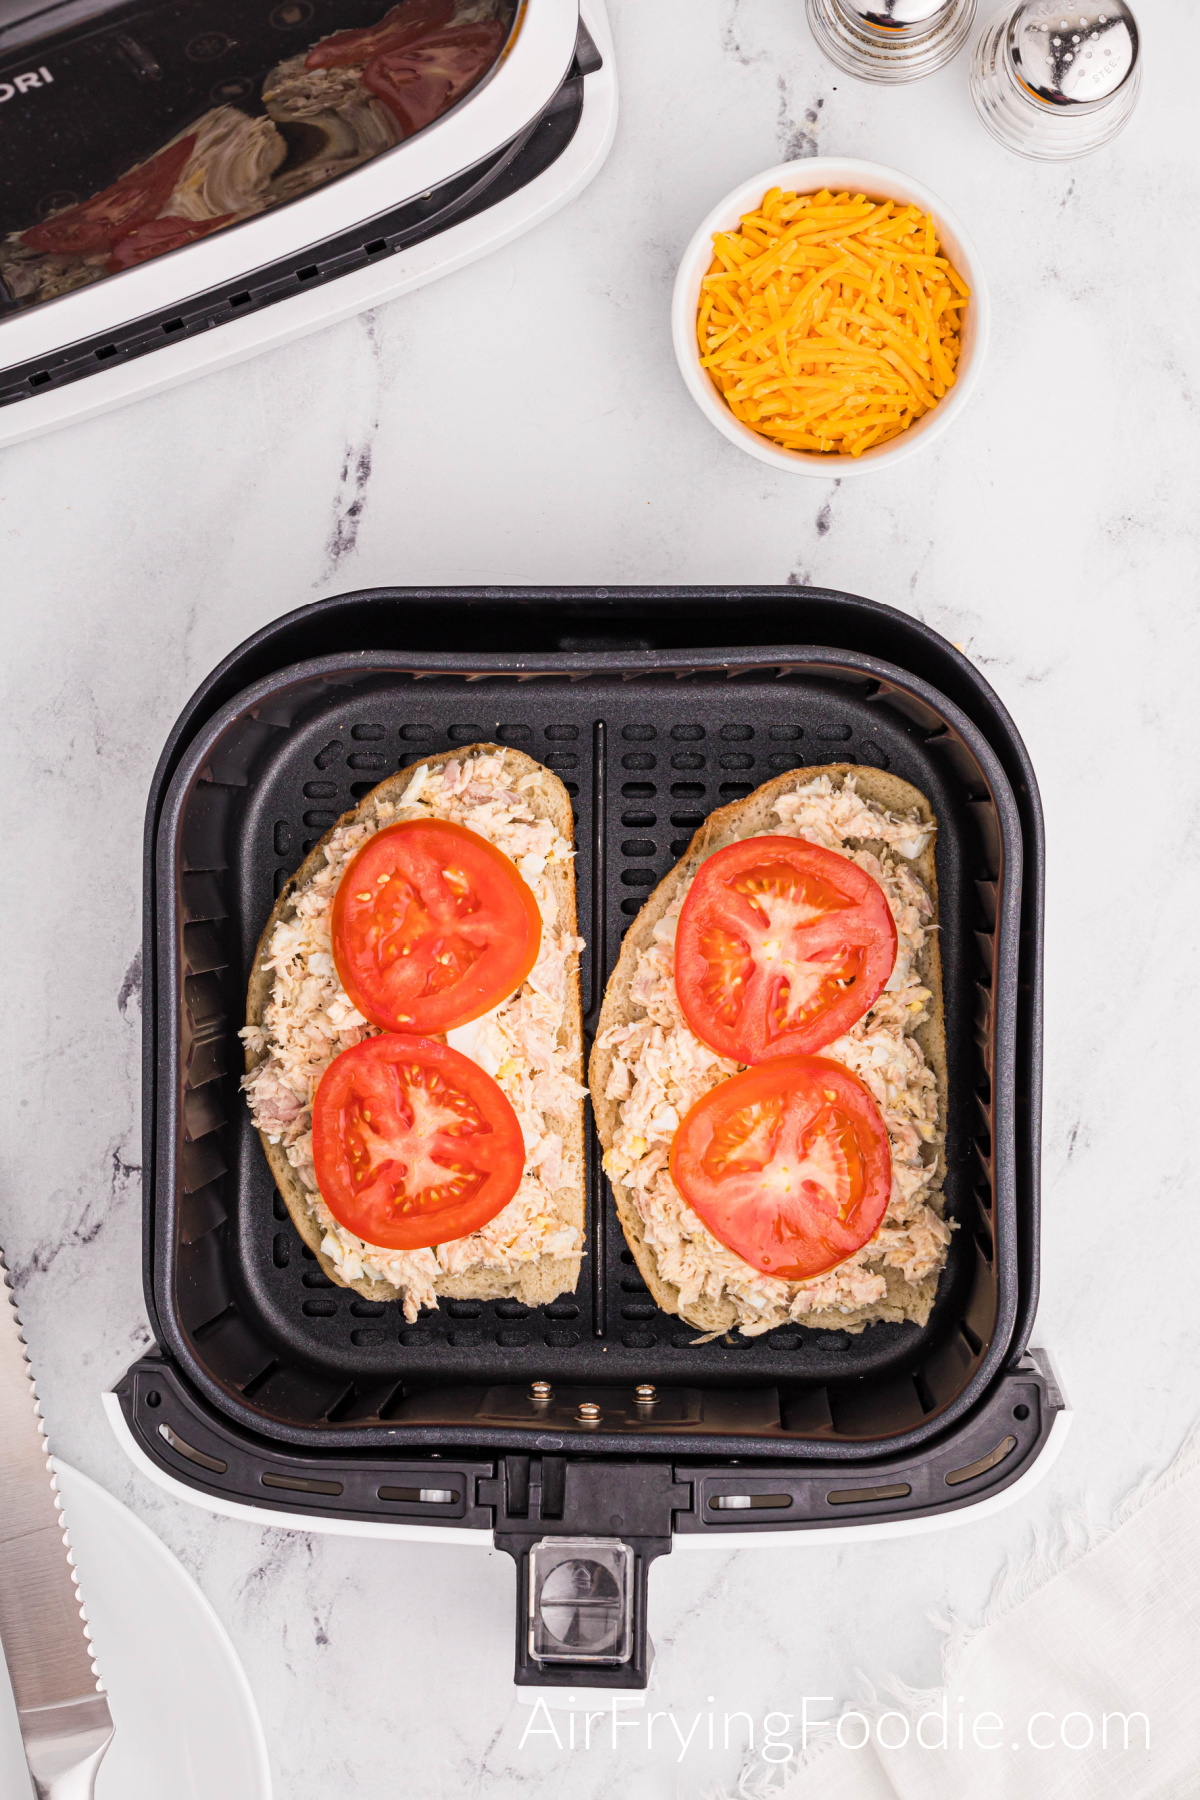 Two slices of Texas toast in the air fryer basket topped with tuna and two slices of tomato on each piece of Texas toast. There is a small bowl of shredded cheese, a salt, and pepper shaker to the top right of the air fryer basket, and a small portion of the air fryer base if at the top left.